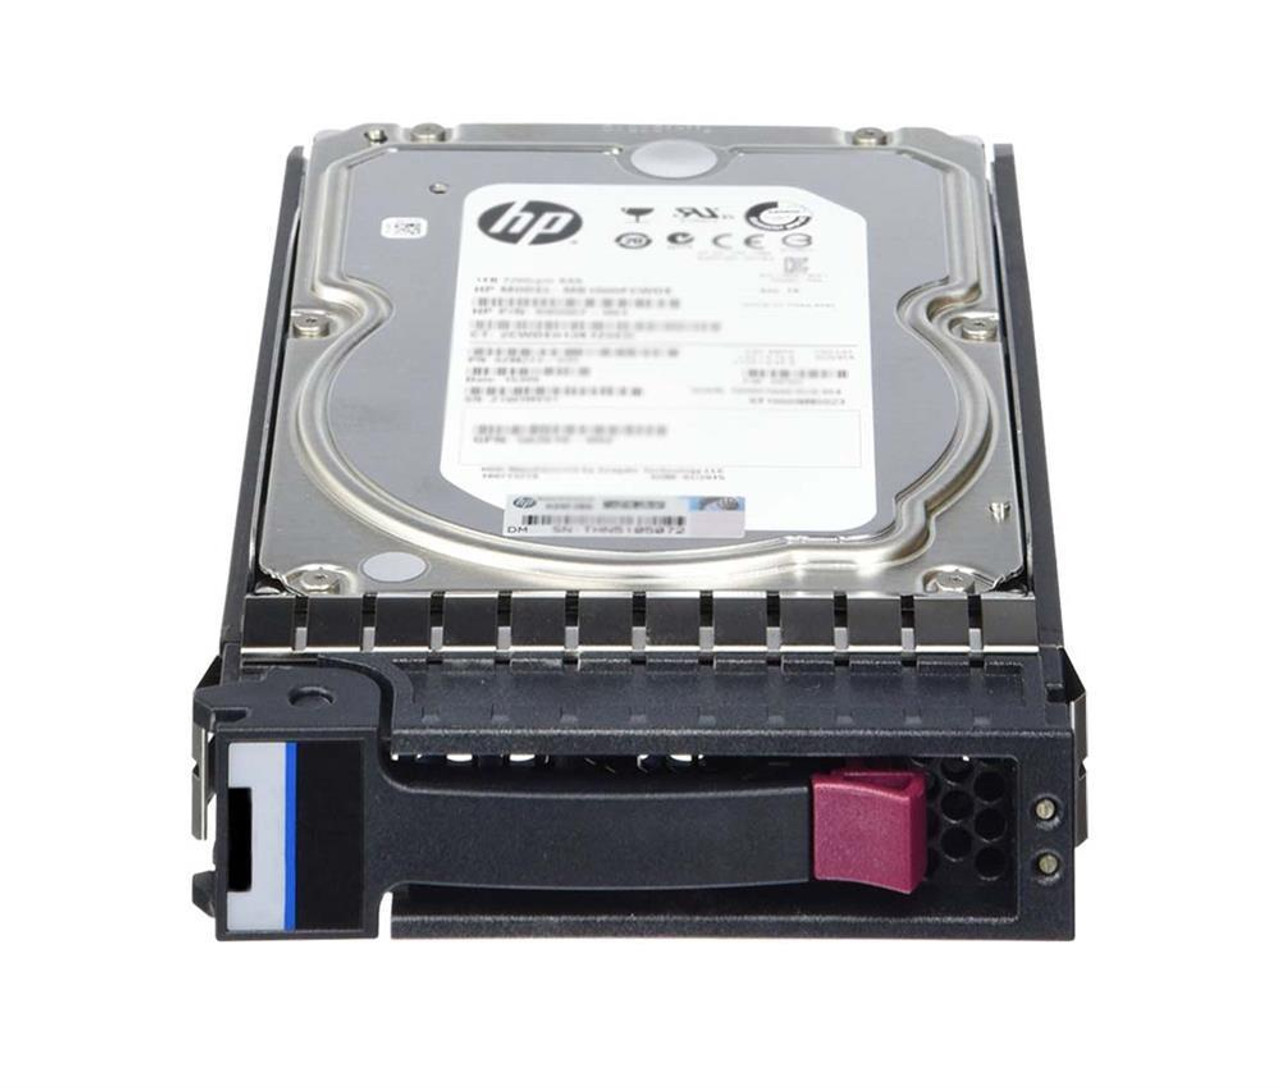 N9Y45A#0D1 HP 32TB (4 x 8TB) 7200RPM SAS 6Gbps 3.5-inch Internal Hard Drive  for